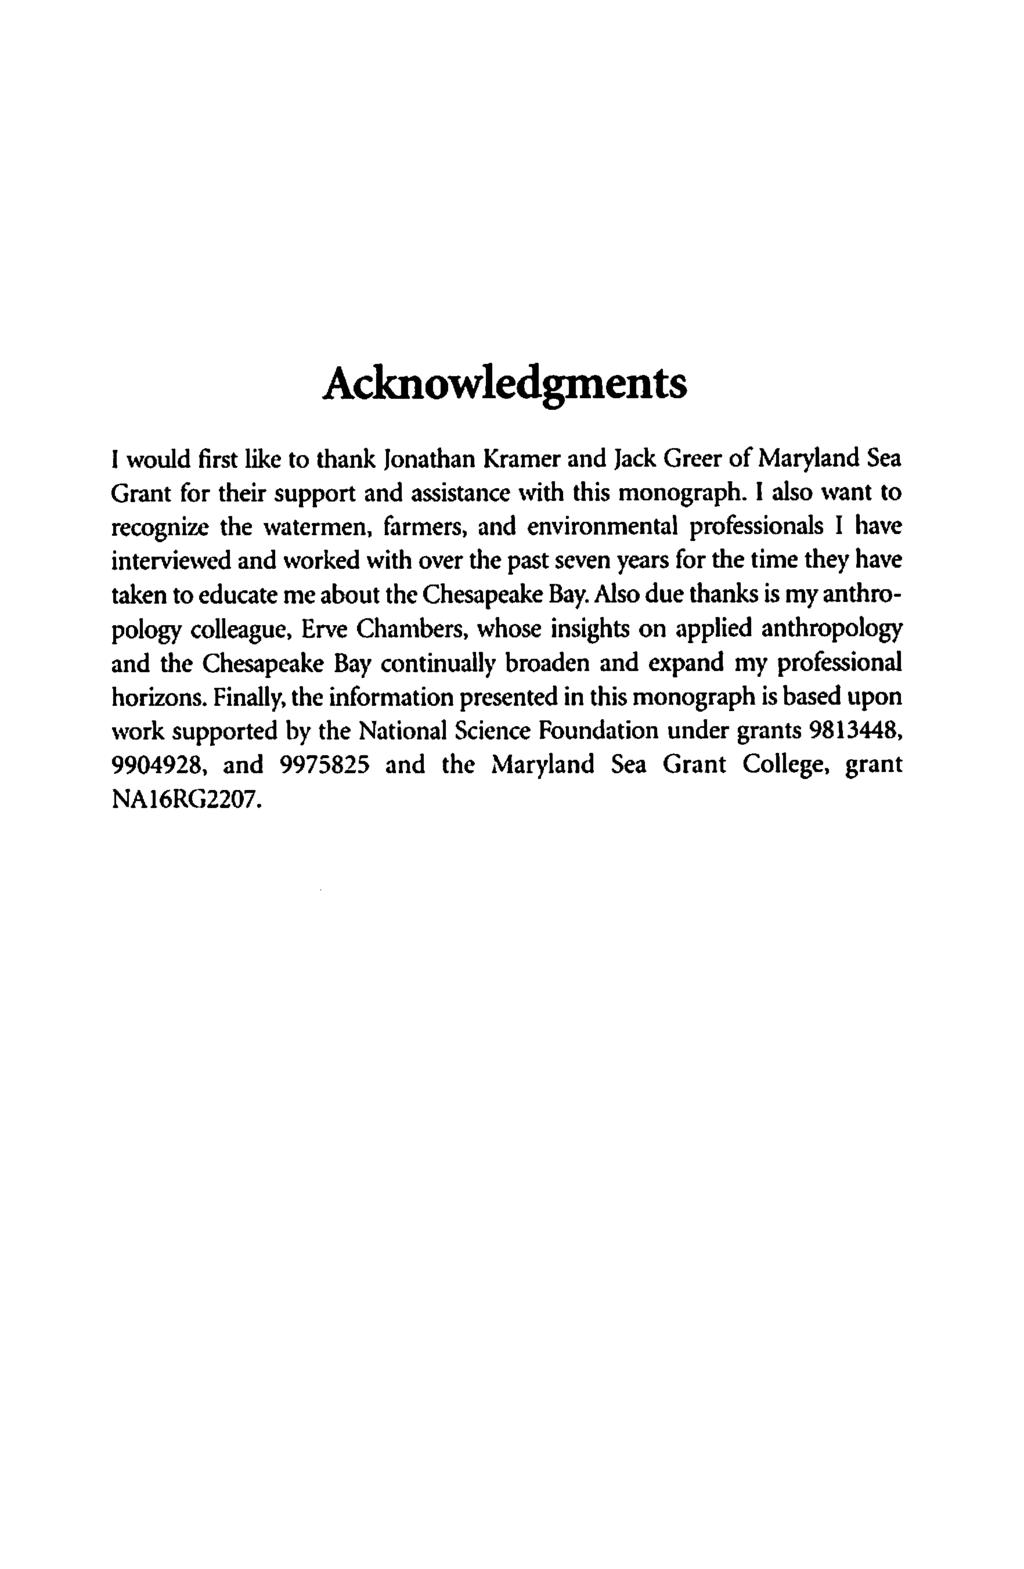 Acknowledgments I would first like to thank Jonathan Kramer and Jack Greer of Maryland Sea Grant for their support and assistance with this monograph.